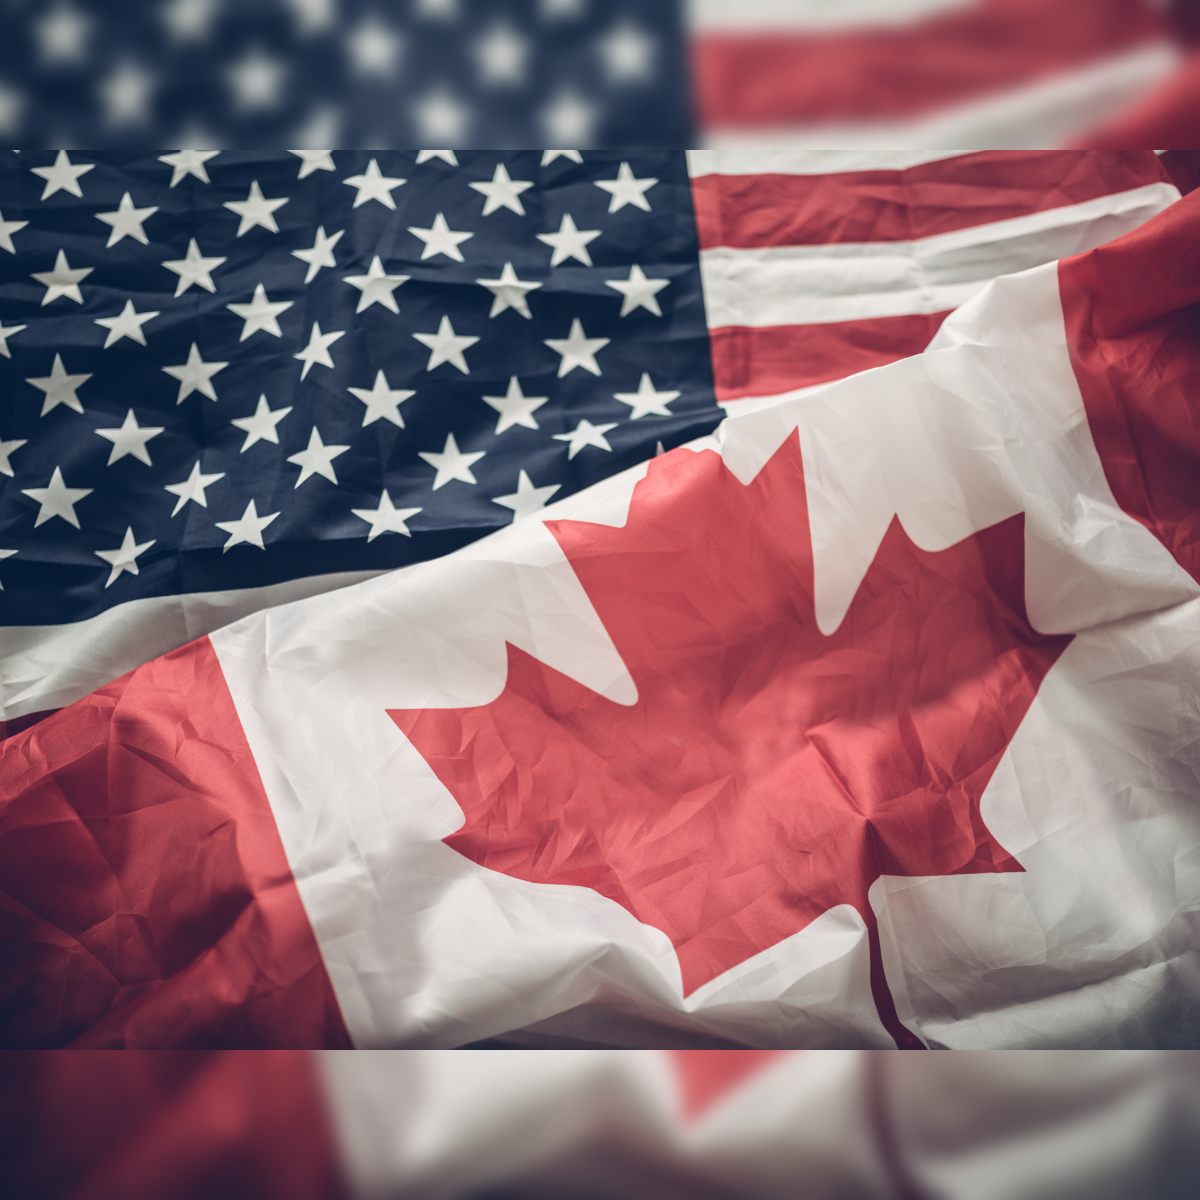 How to apply for a visa in Canada through flagpoling?